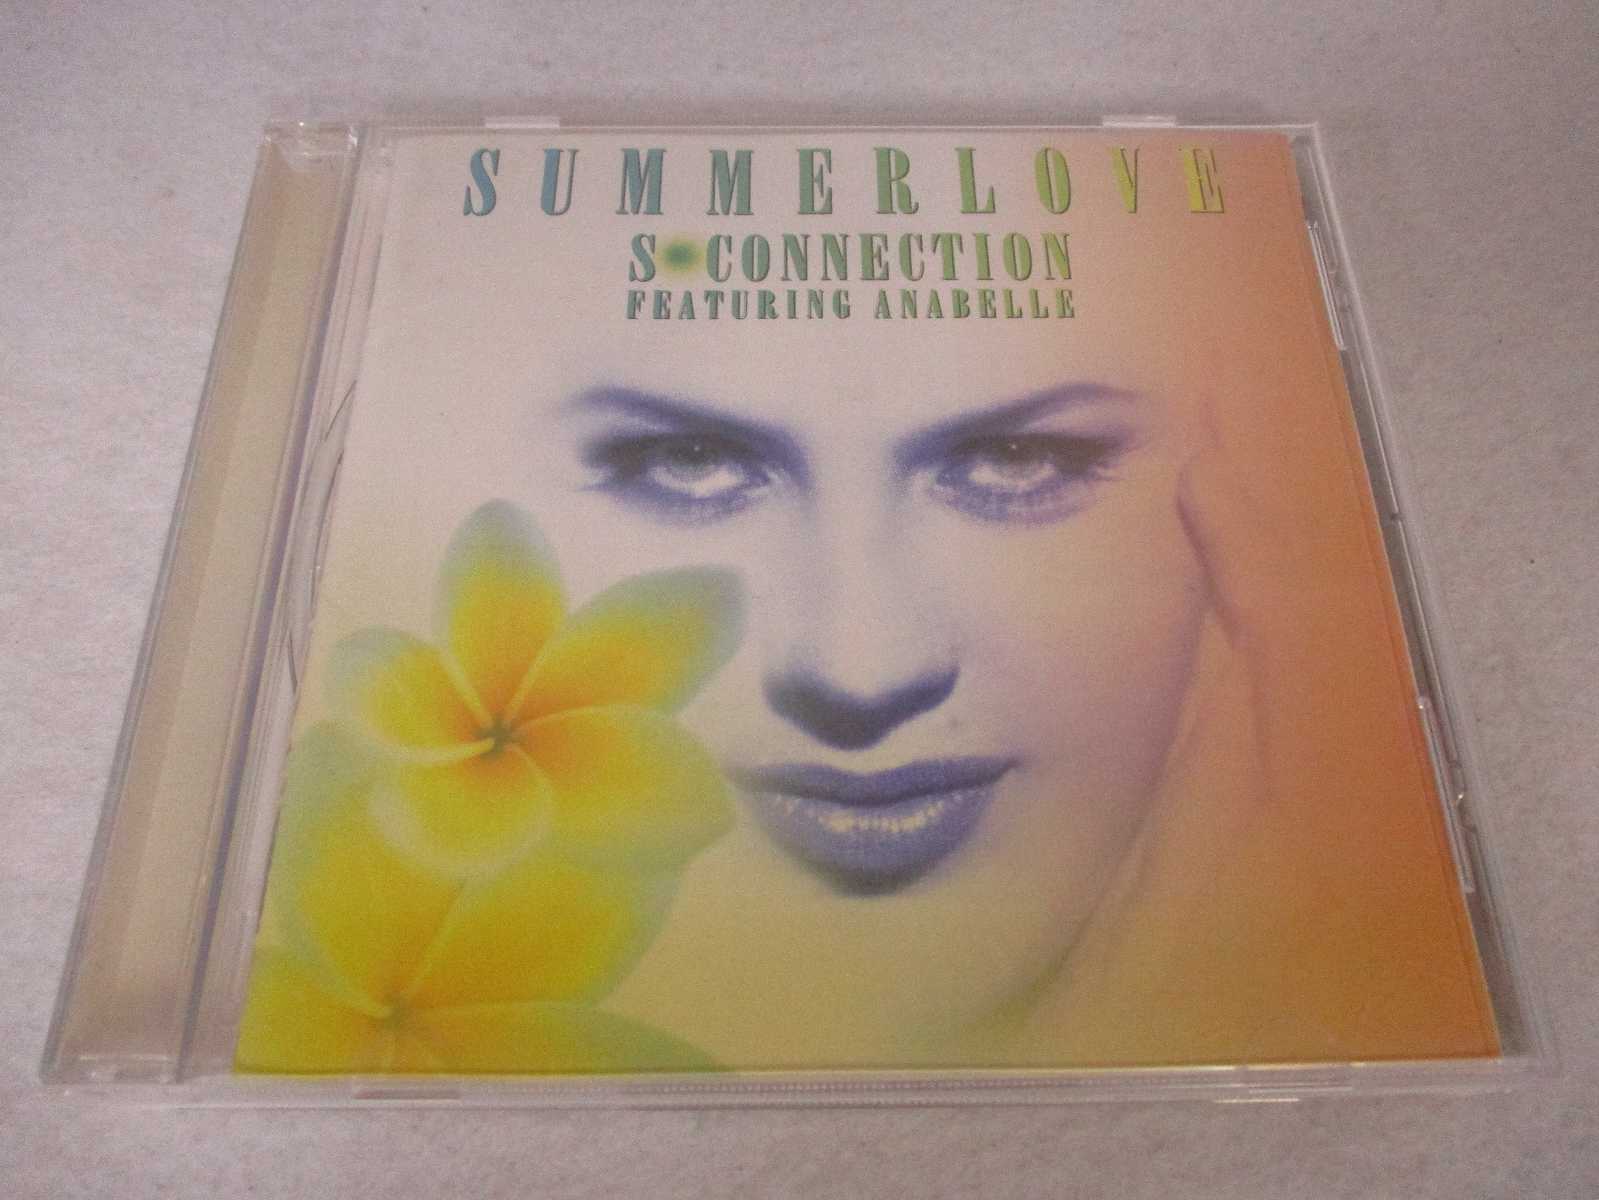 AC00665 【中古】 【CD】 SUMMERLOVE 日本盤/S-CONNECTION FEATURING ANABELLE